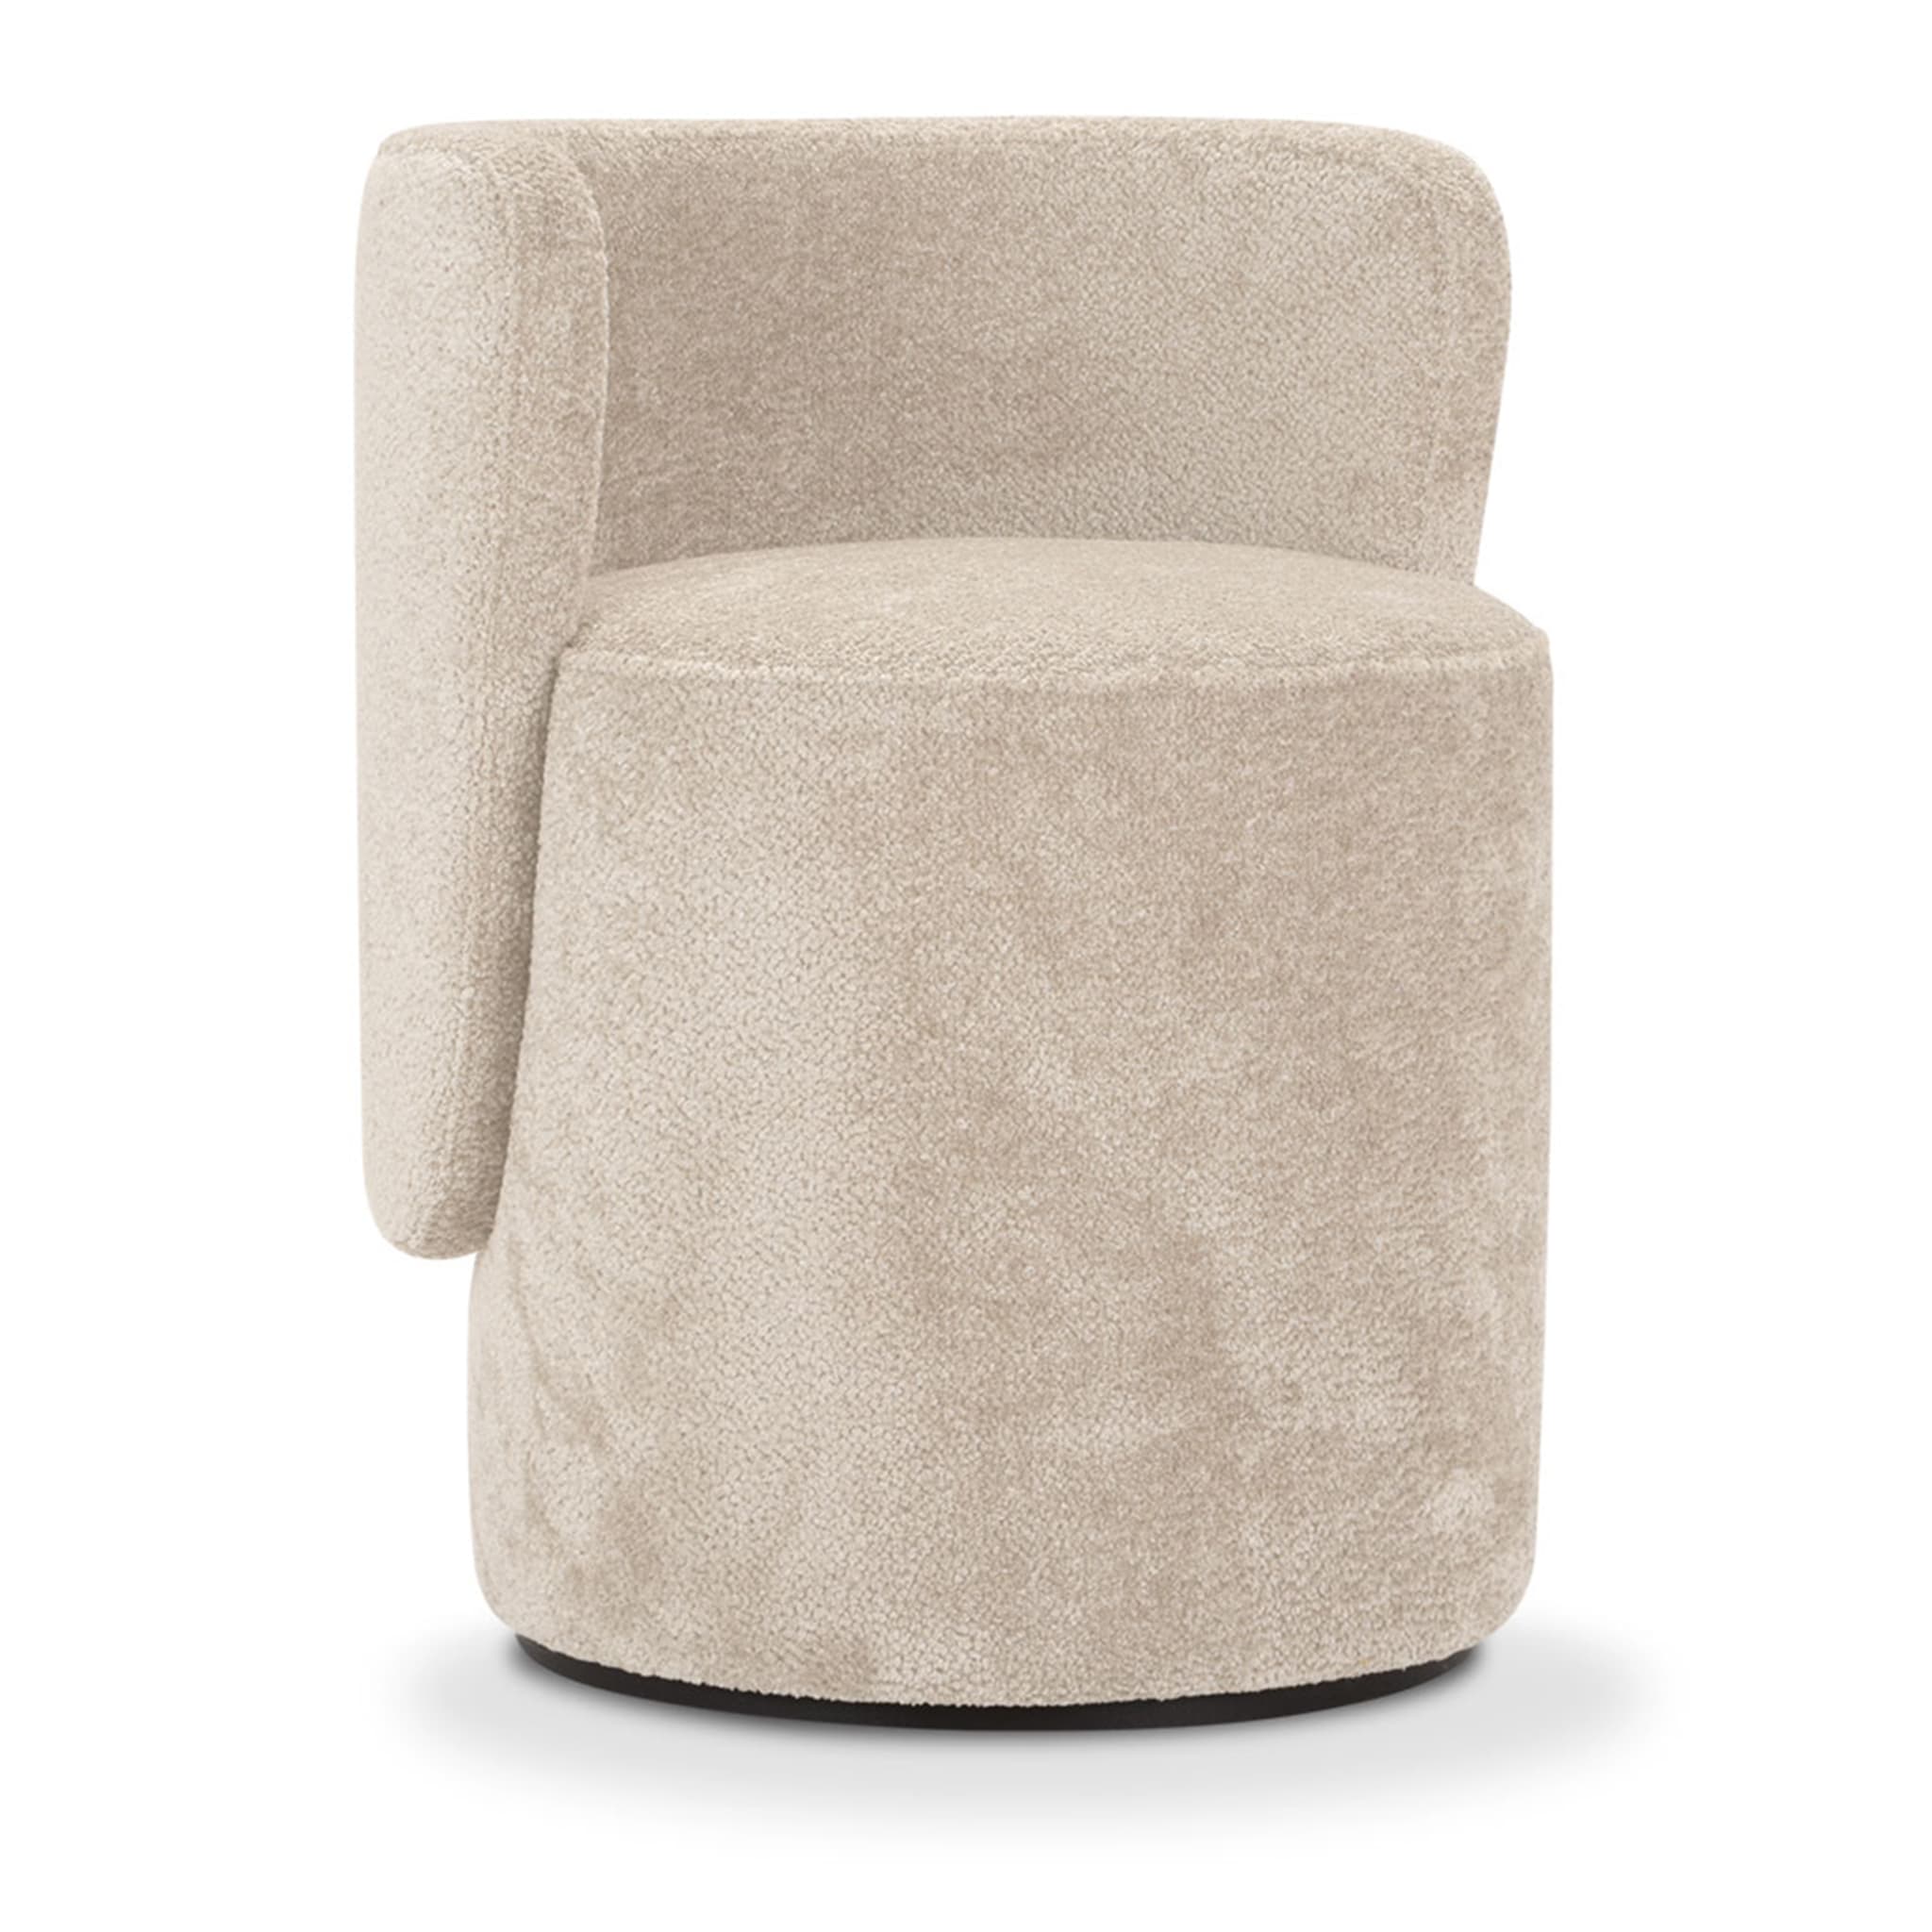 Boll Cylindrical Beige Textile Lounge Chair by Simone Micheli - Alternative view 1